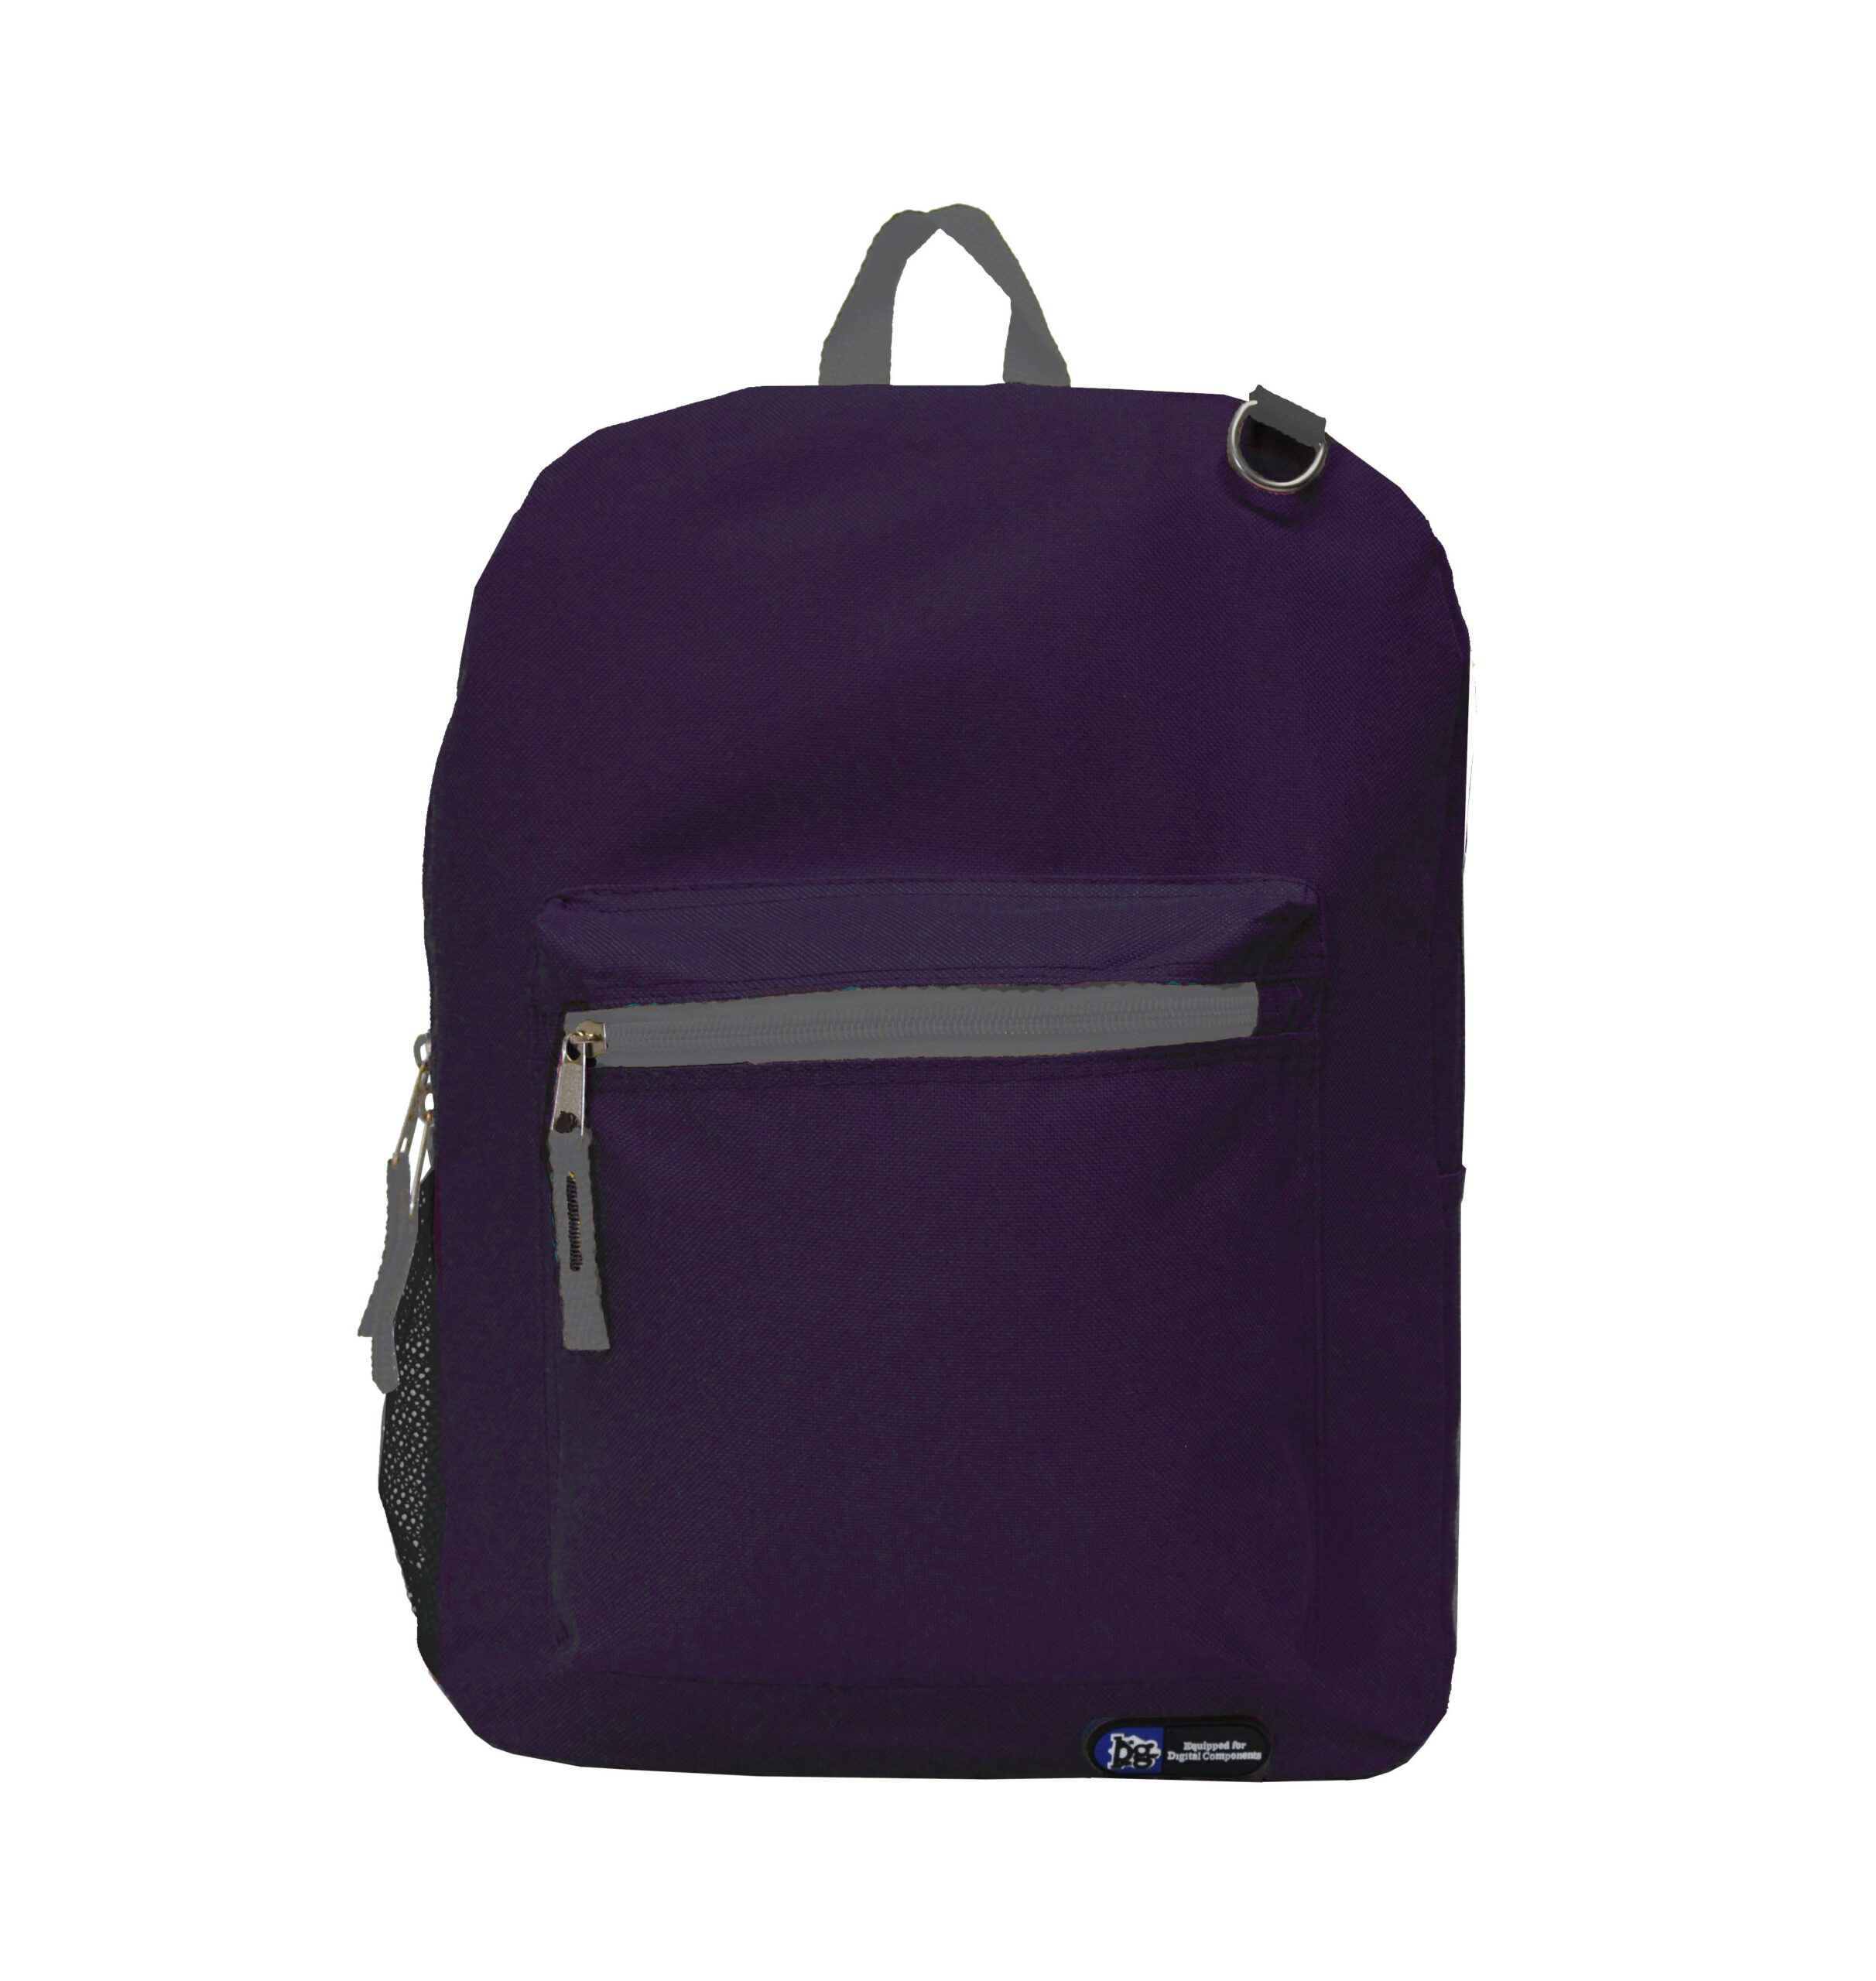 Backpack 16.5″ inches (001-BPG311S/TB205/101s) Case Price $360.00/9.00 ...